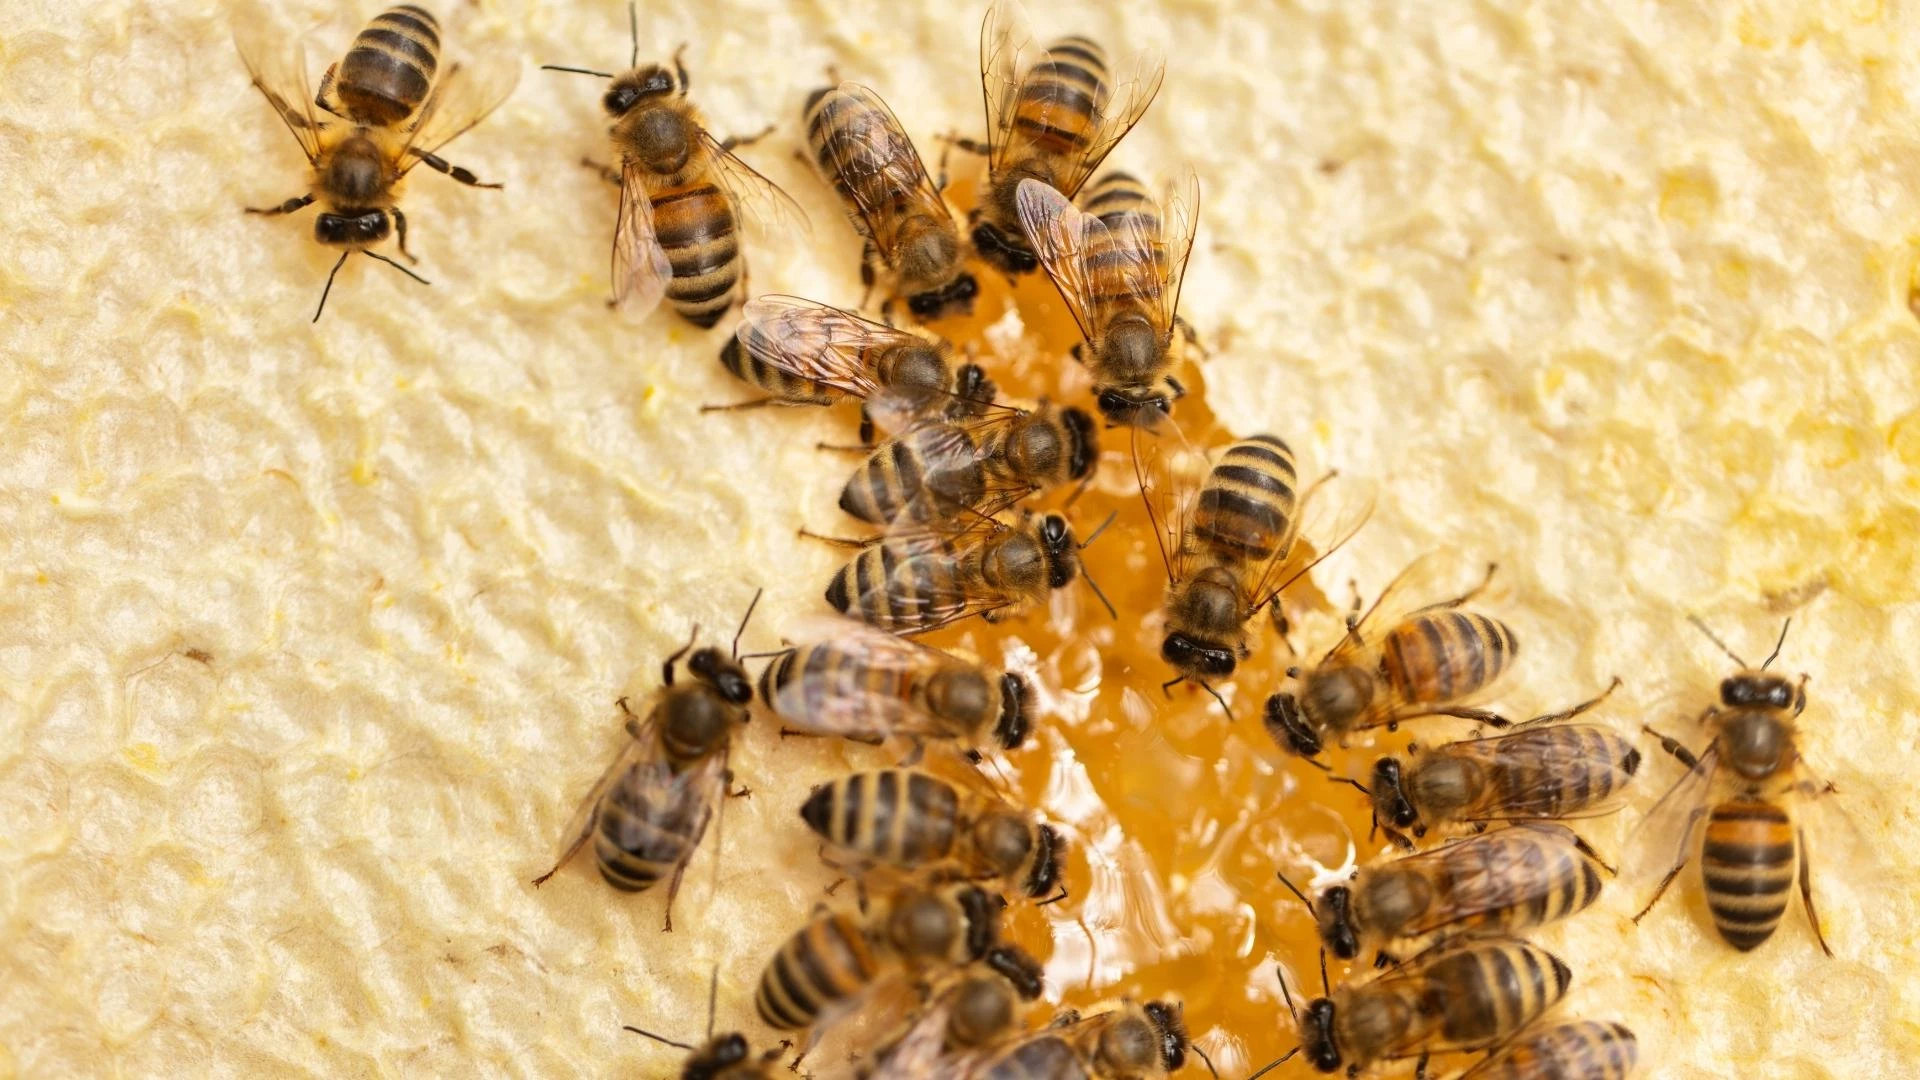 What is Propolis? What Does Propolis Do? What Should You Know About Propolis? Is Propolis Faulty? How should propolis be used?